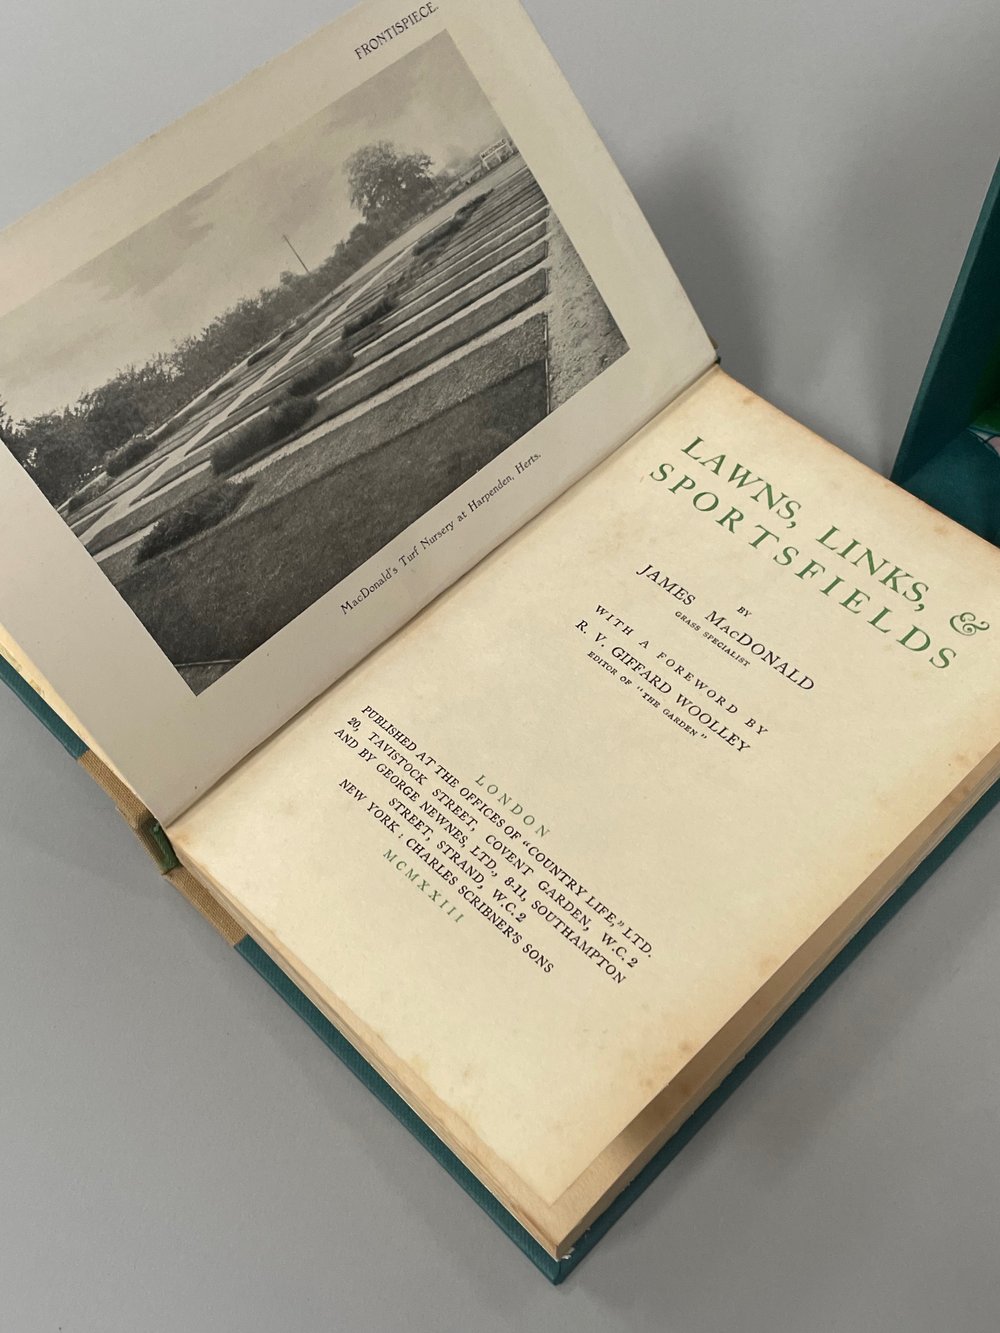 Lawns links and Sportsfields by James max Donald, Gardeners book